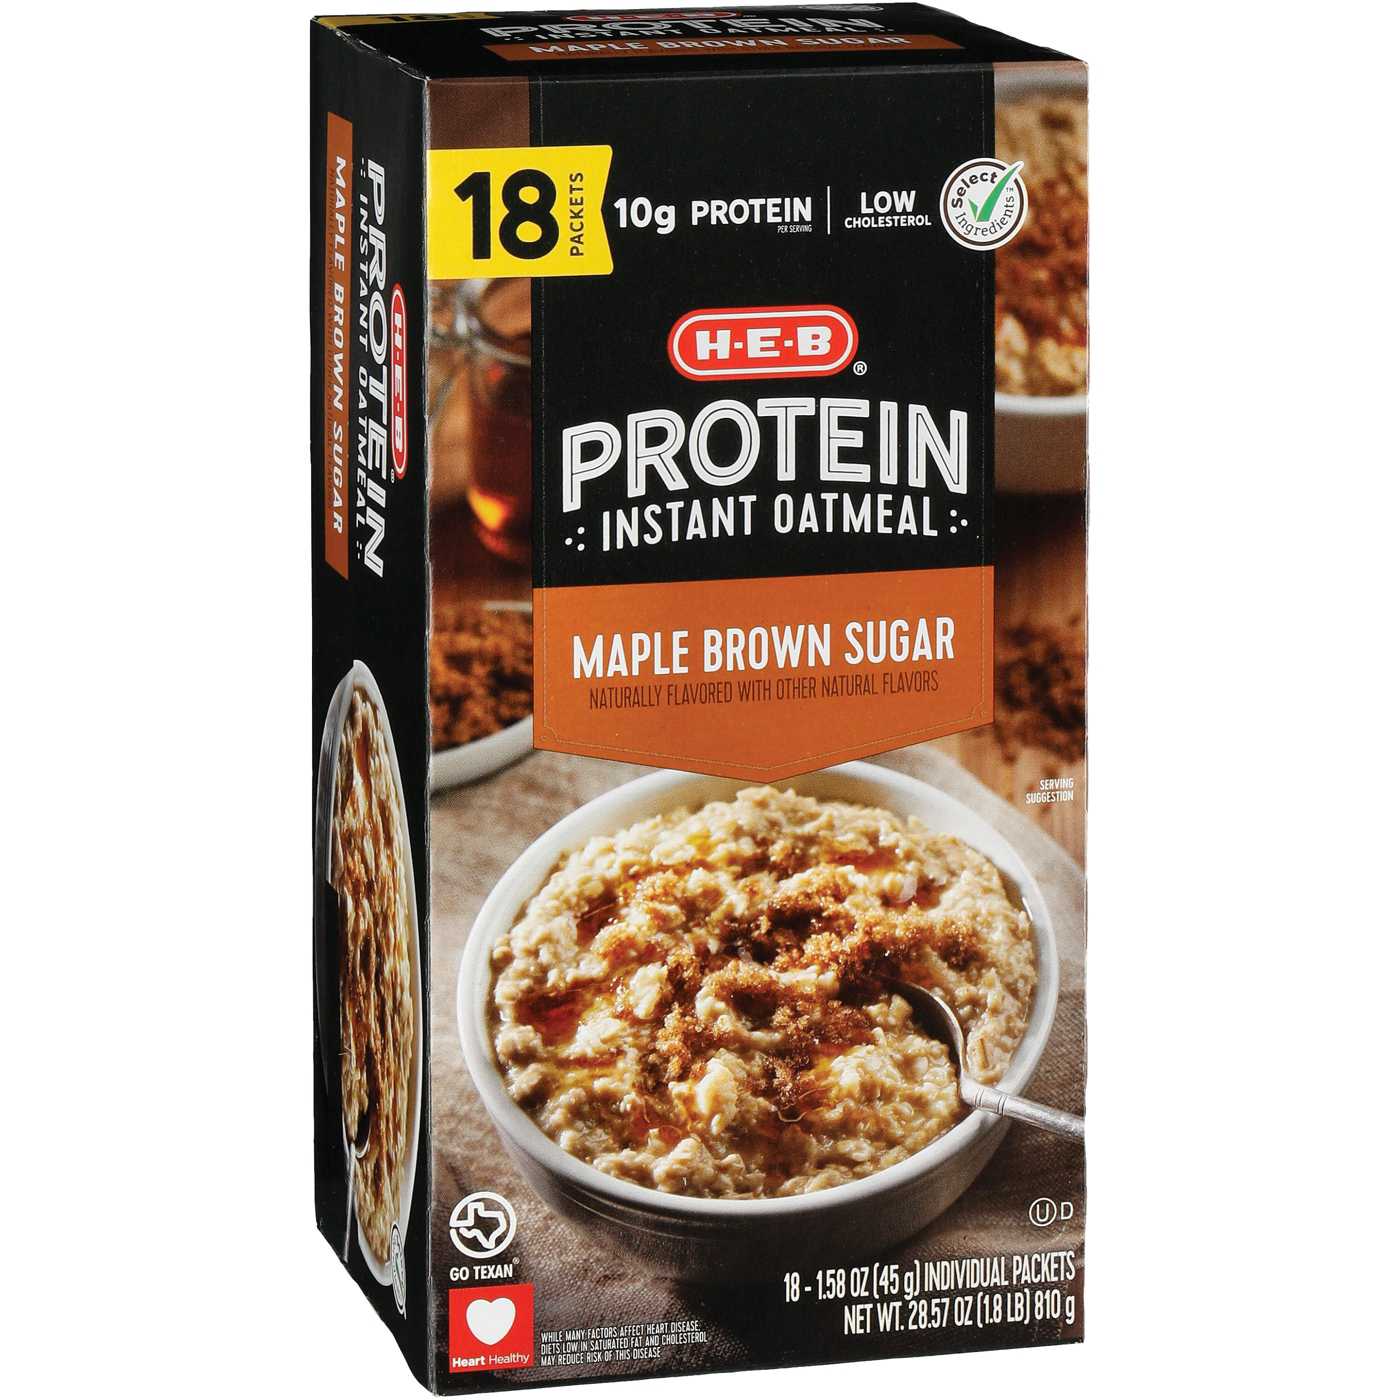 H-E-B 10g Protein Instant Oatmeal - Maple Brown Sugar; image 1 of 2